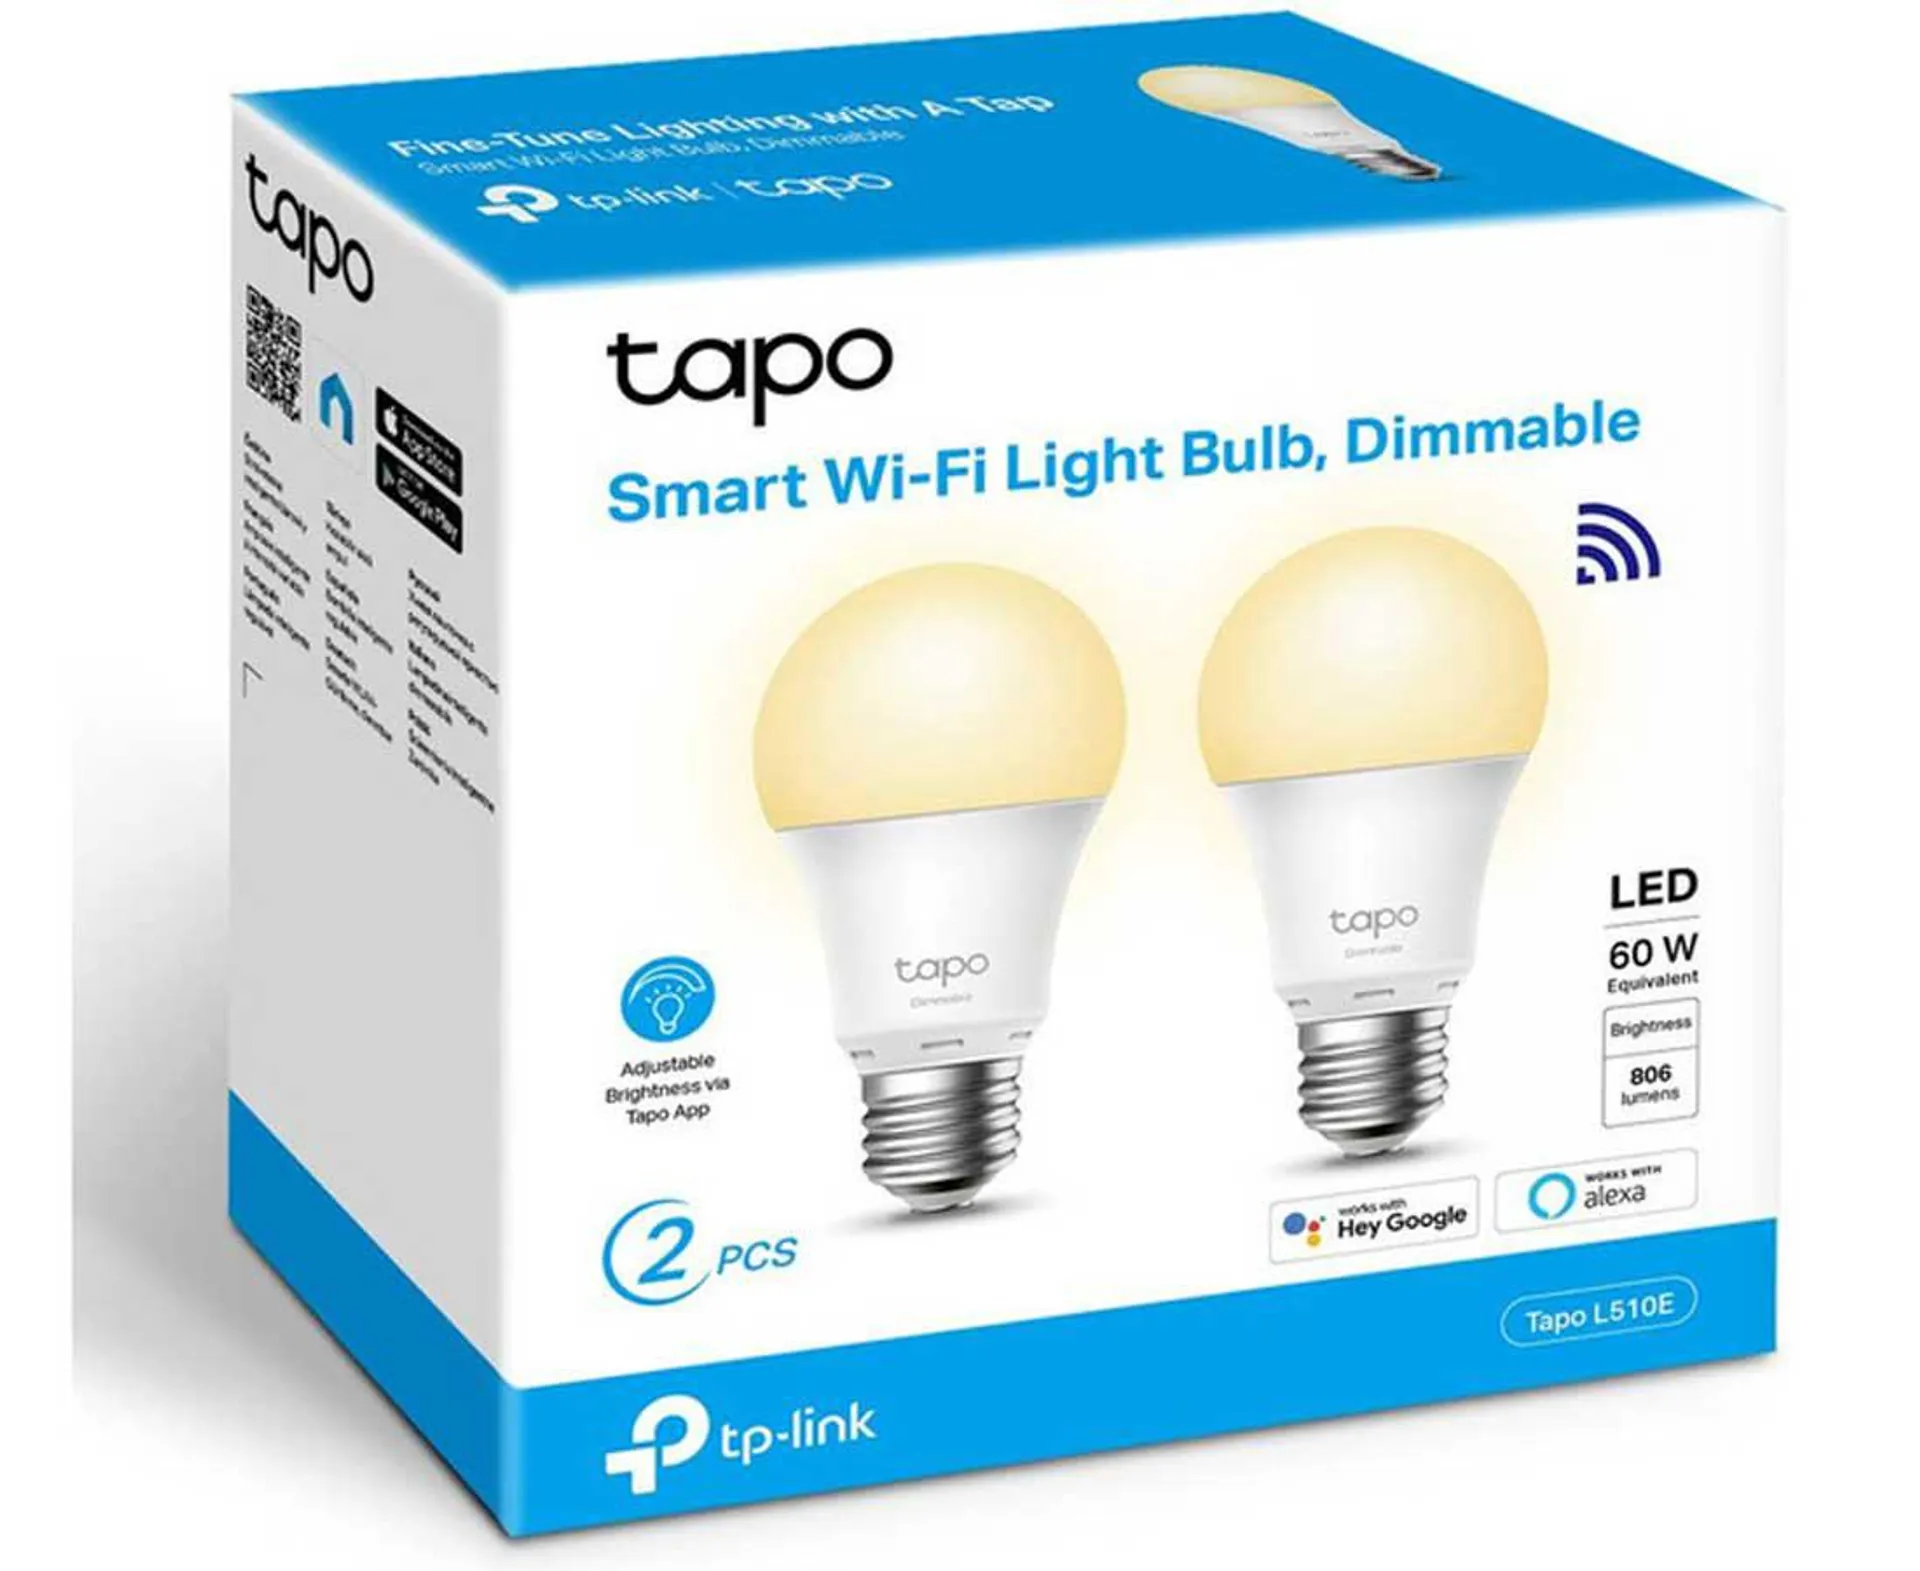 Tapo Smart Wi-Fi Dimmable Light Bulb | L510E | 2 Pack